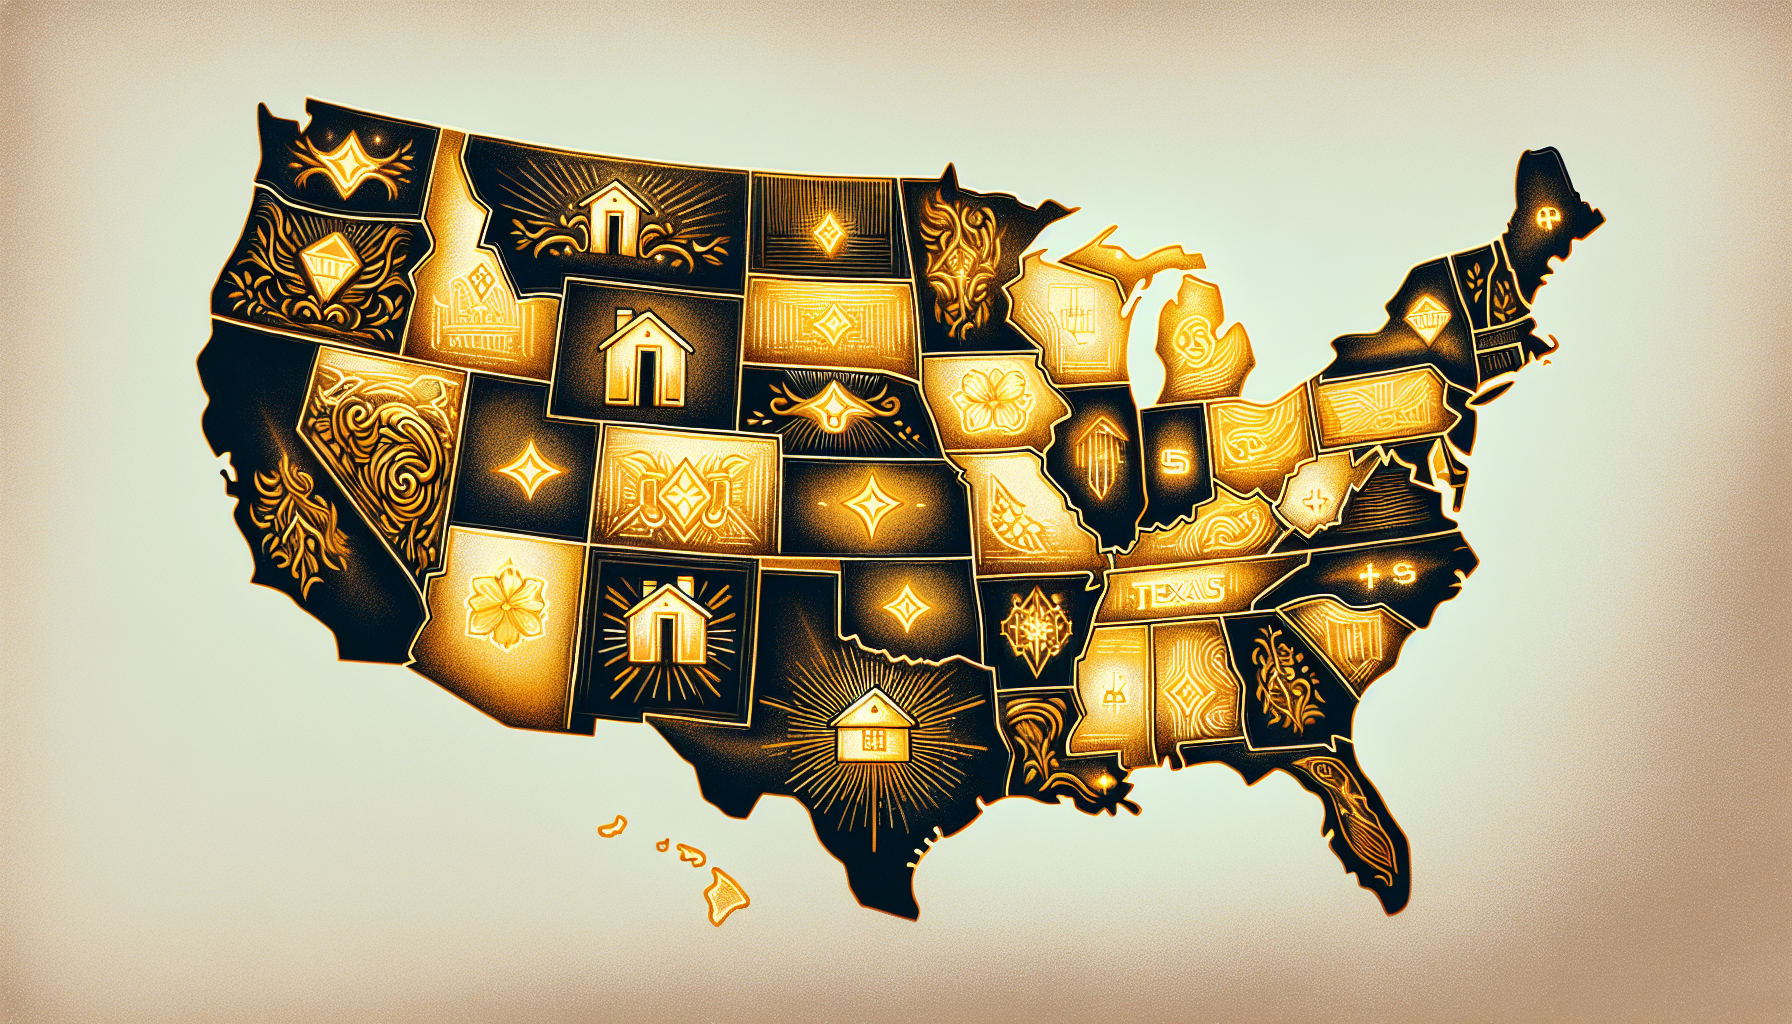 Illustration of a map of the United States with highlighted states for real estate investment